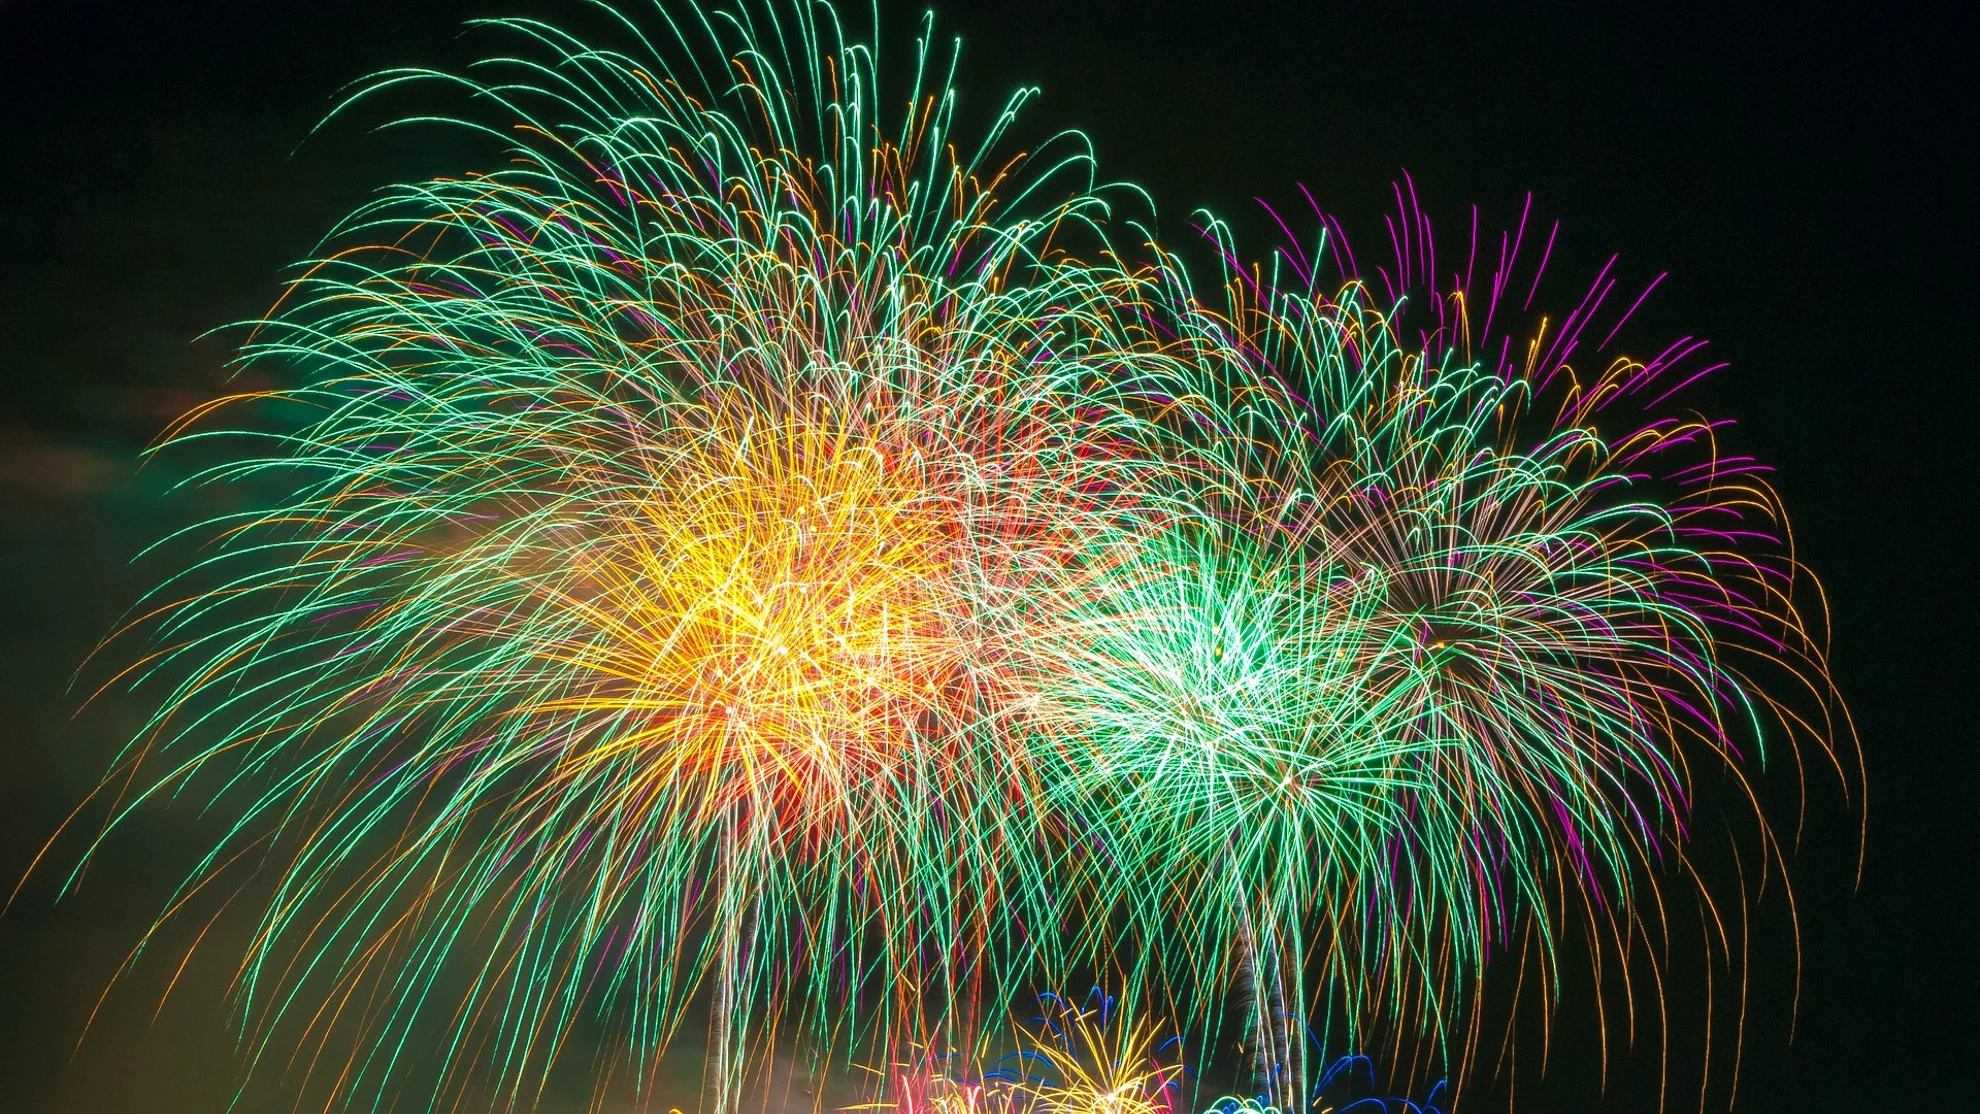 The science behind fireworks: What goes into amazing Victoria Day displays? Find out, here!